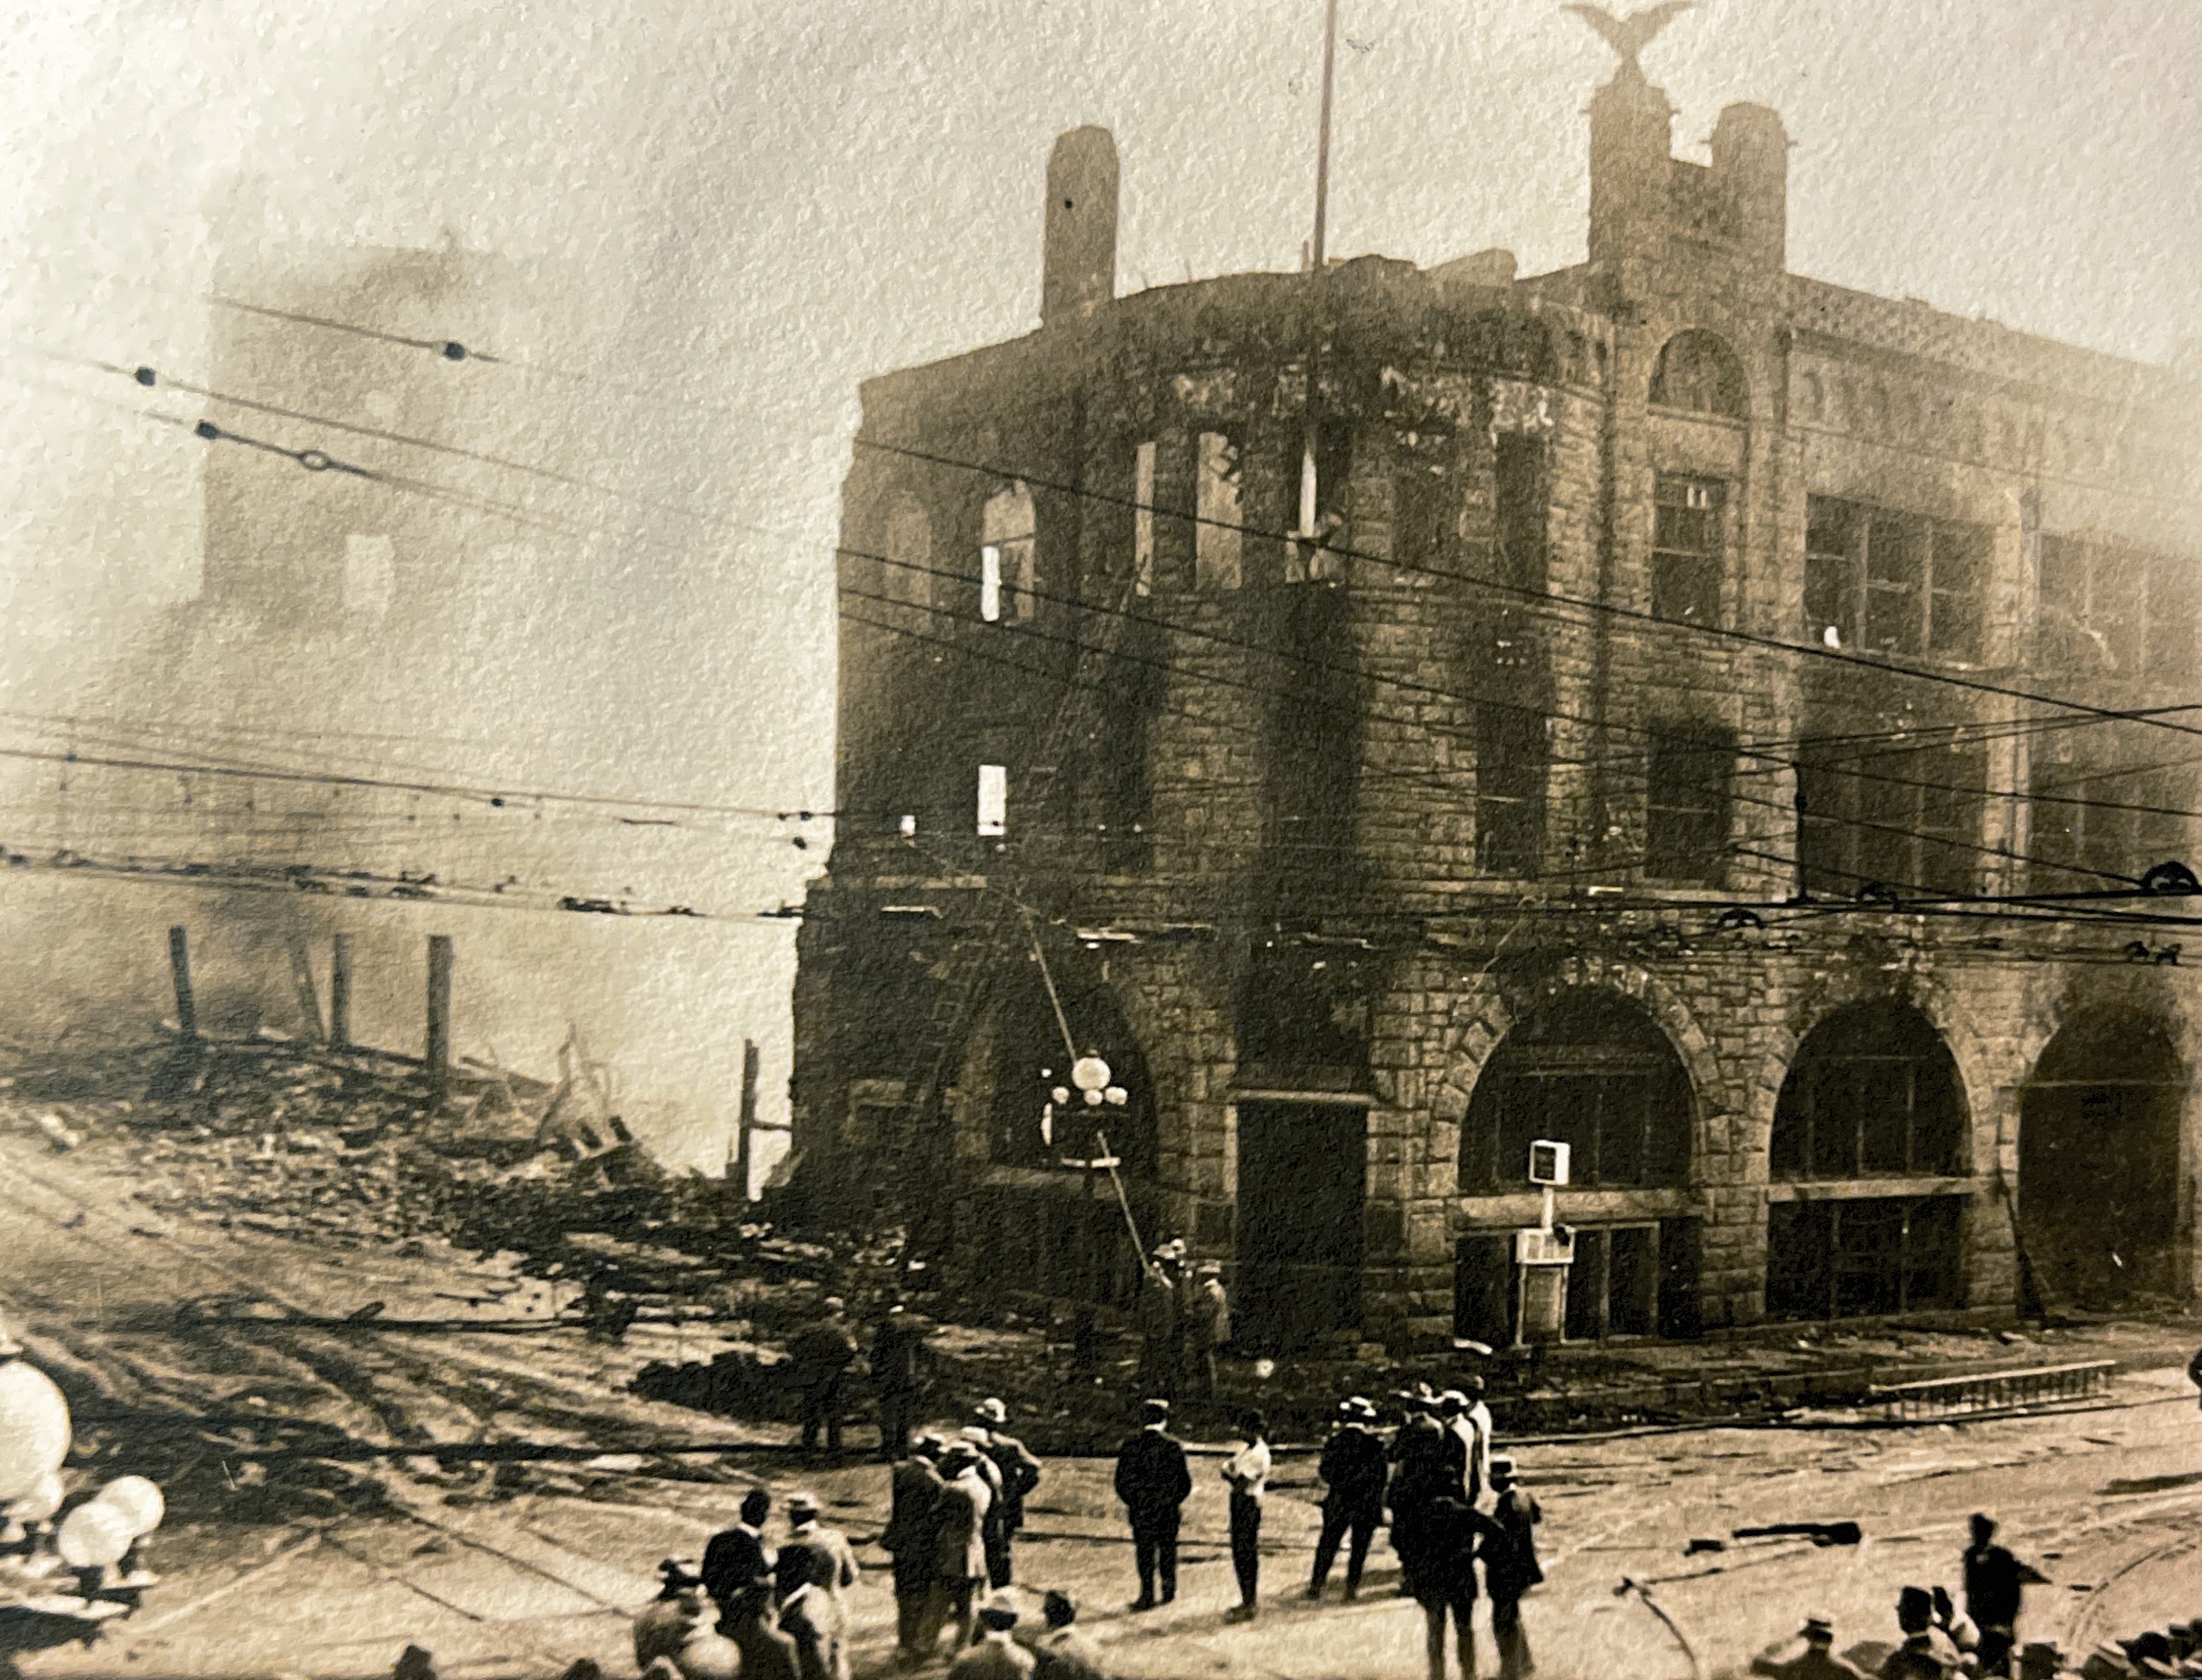 Smoking ruins of the Times Building. Taken October 1st 1910, a few hours after the explosion which caused the loss of so many lives.